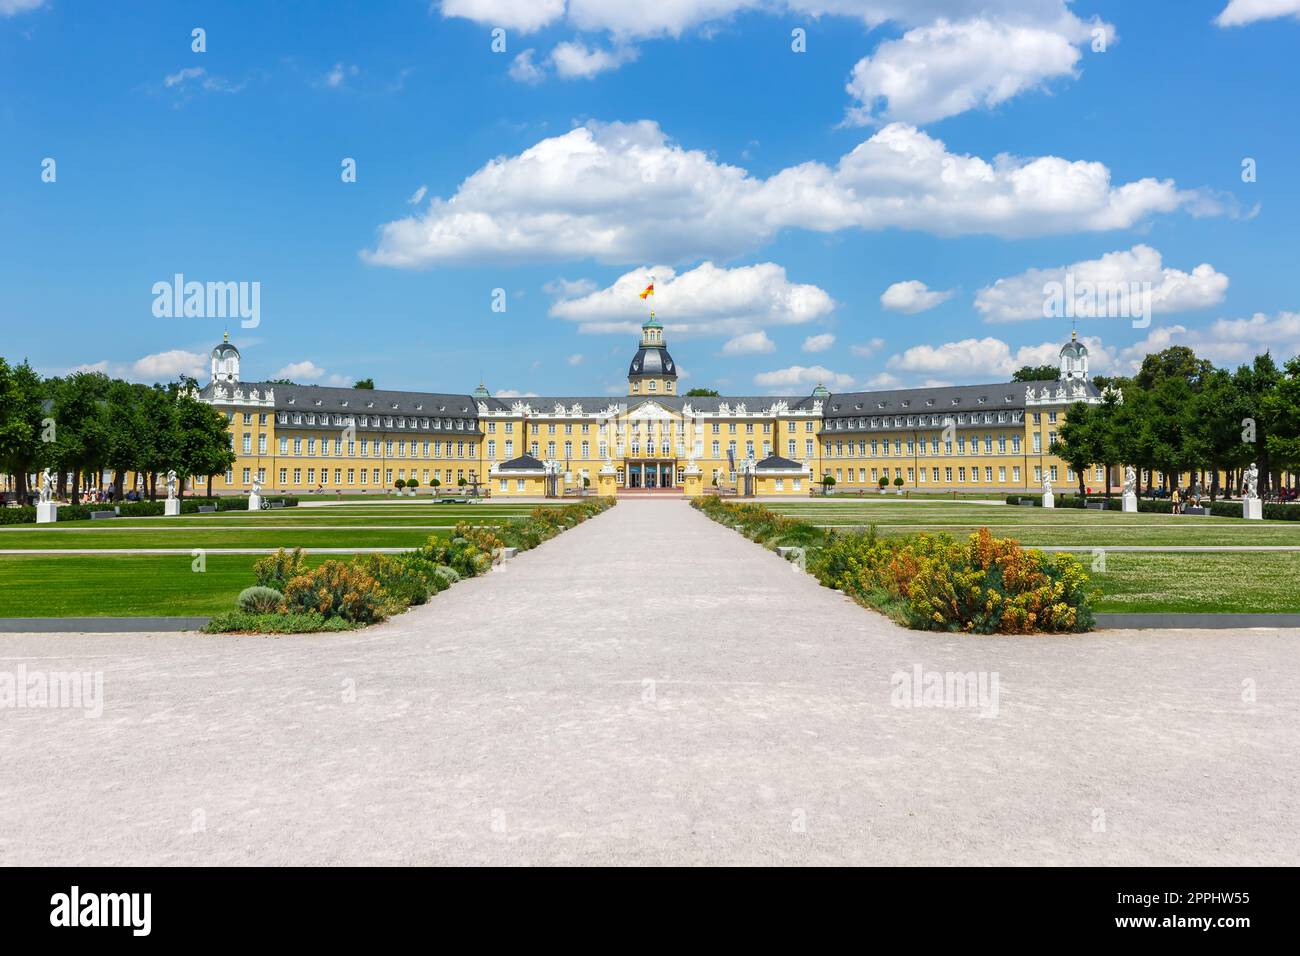 Karlsruhe Castle royal palace baroque architecture travel in Germany Stock Photo